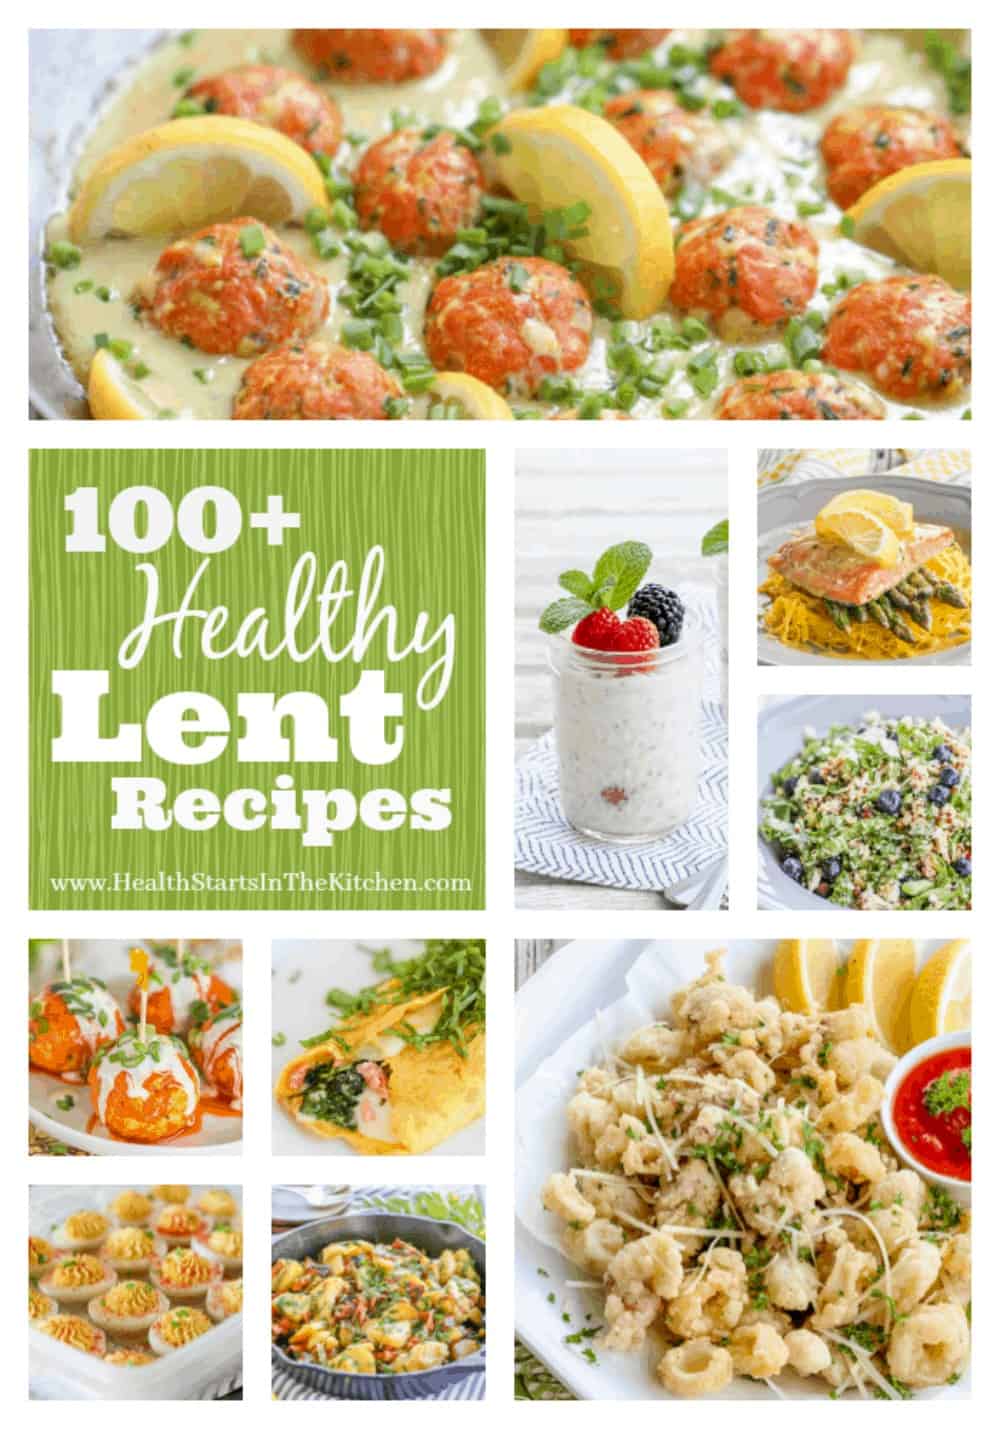 100+ Healthy Recipes For Lent